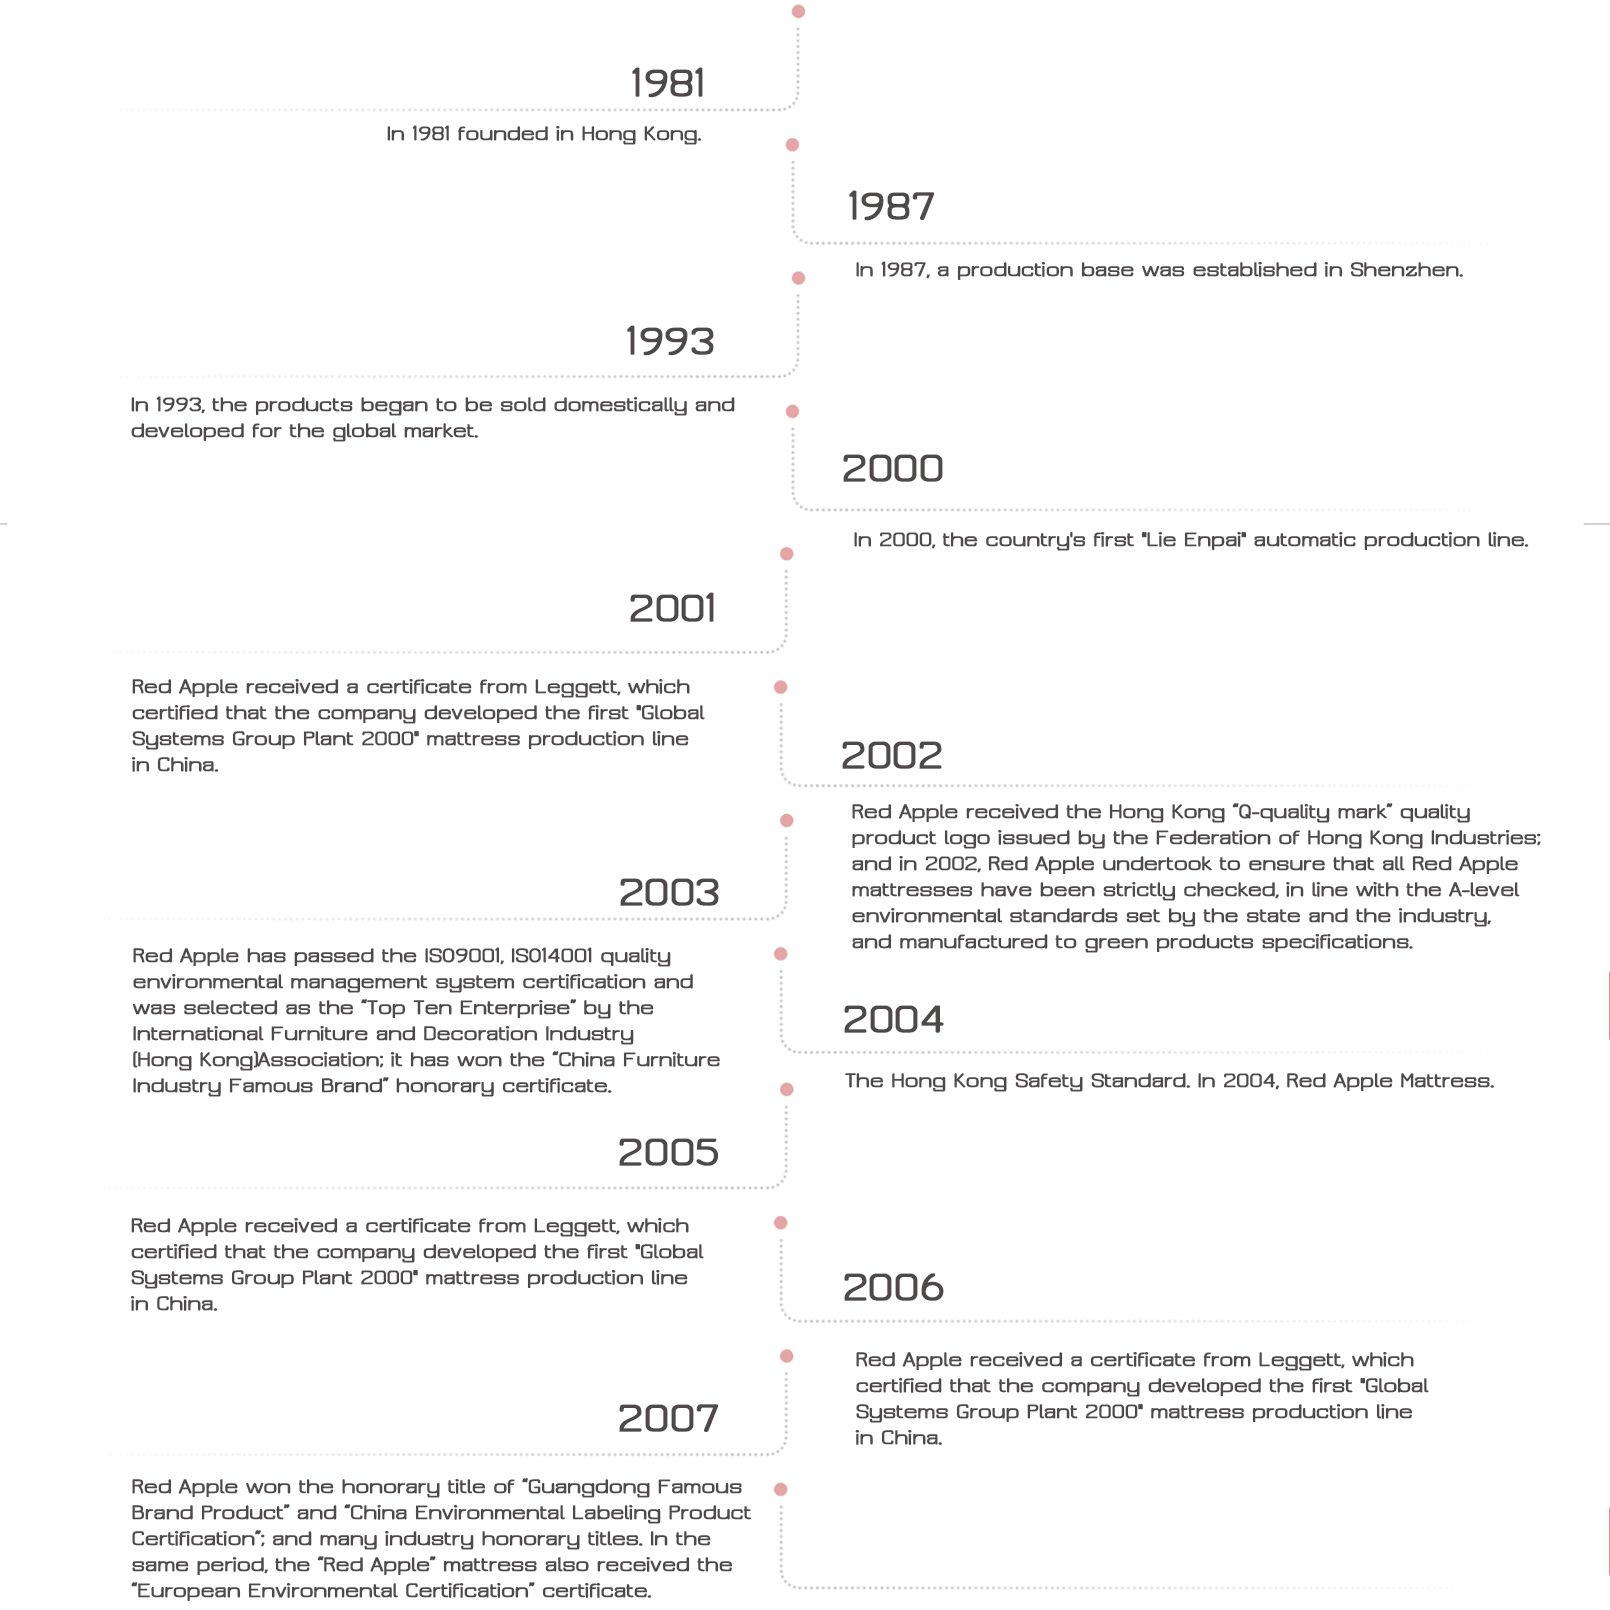 History of Red Apple